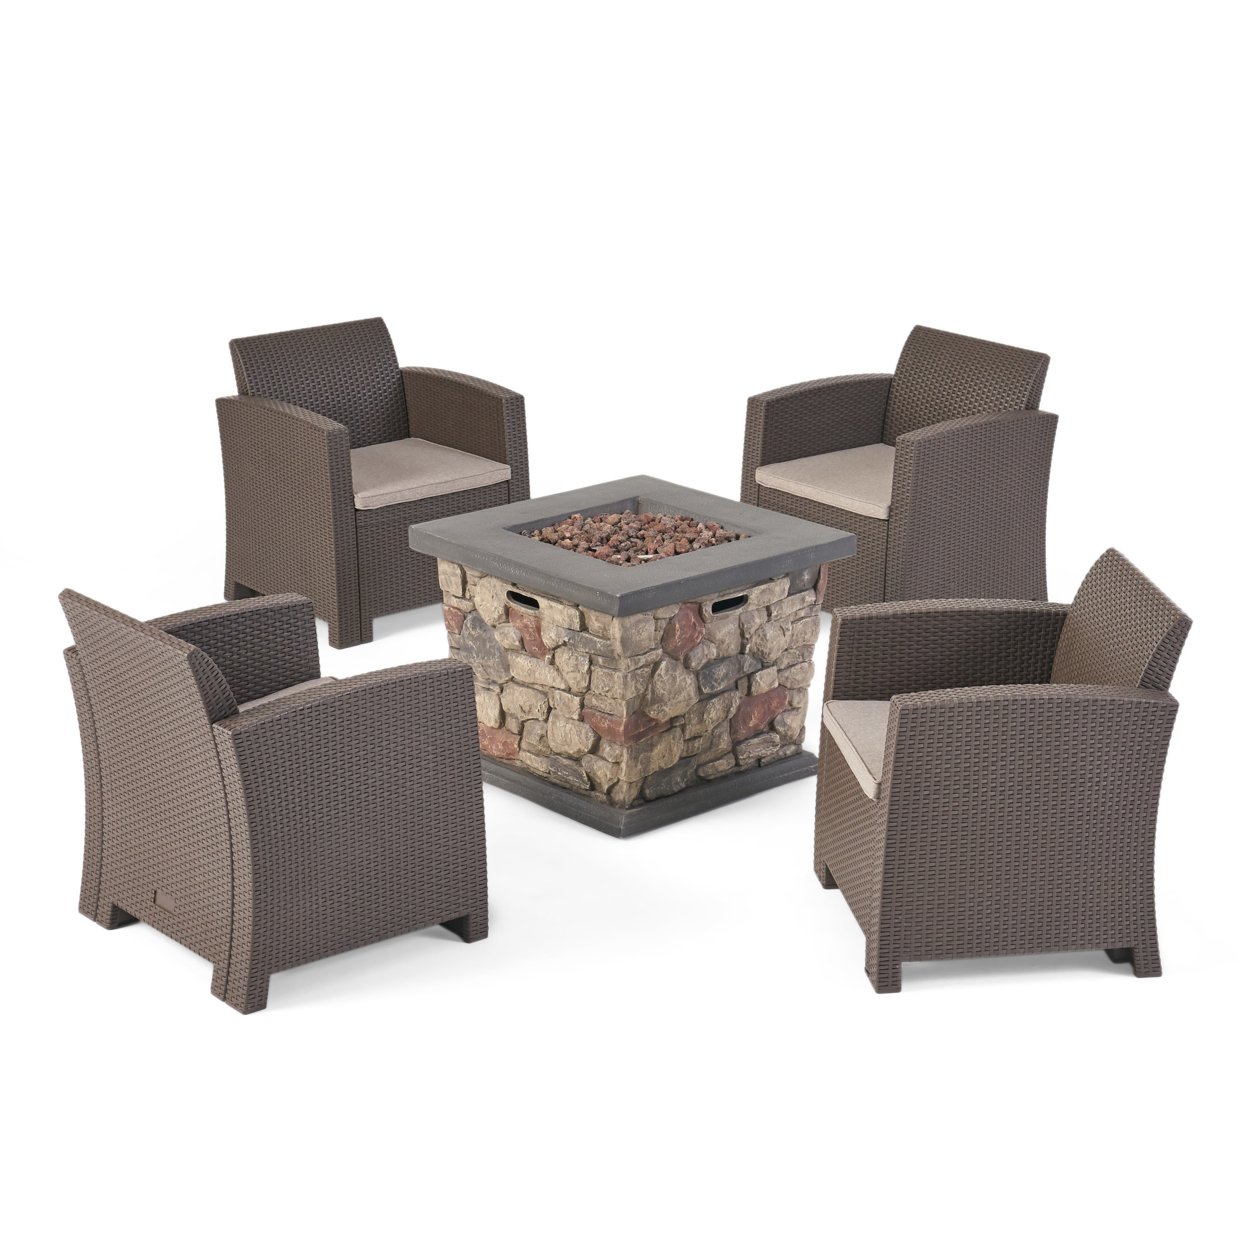 Maggie Outdoor Chat Set With Fire Pit - Brown + Mixed Biege